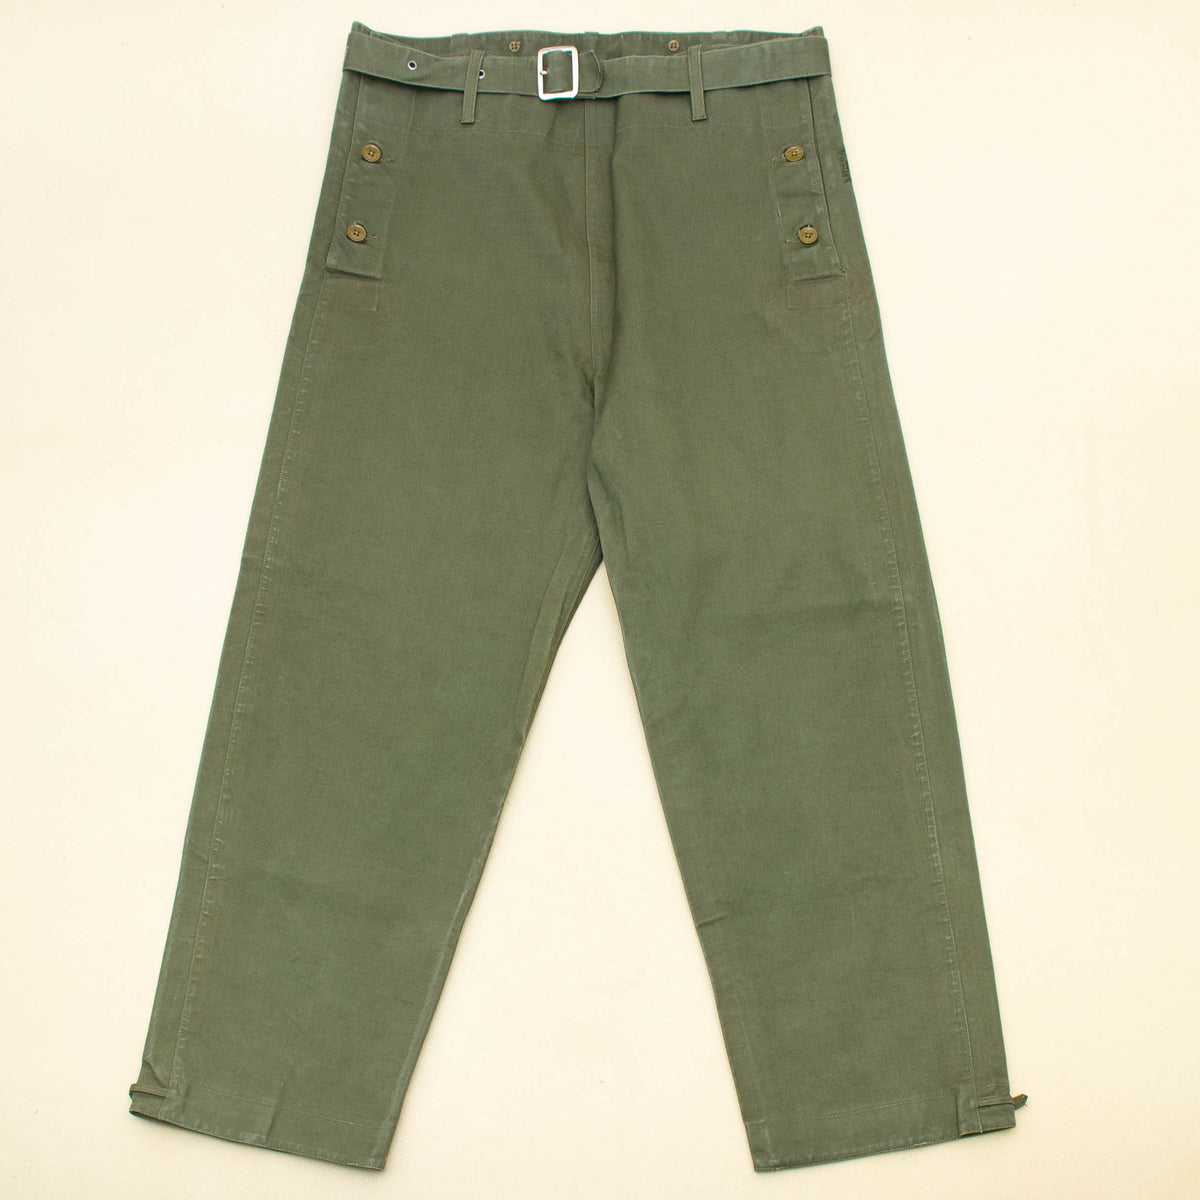 NOS 50s Vintage Canadian Army Motorcycle Dispatch Riders Trousers 